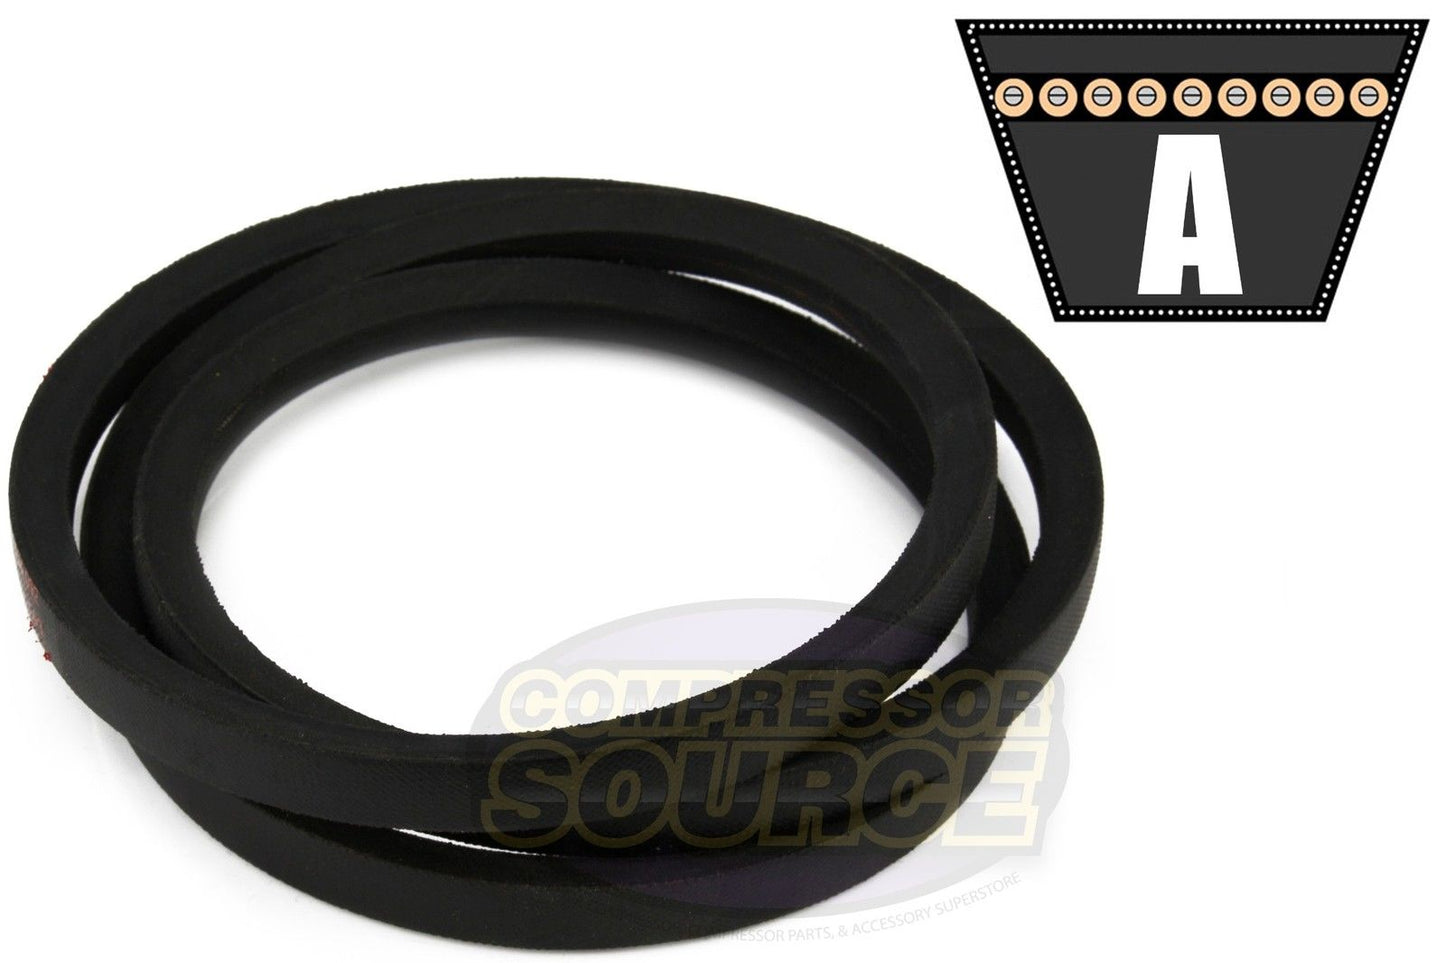 A64 Replacement High Quality Industrial & Lawn Mower 1/2" x 66" V Belt 4L660